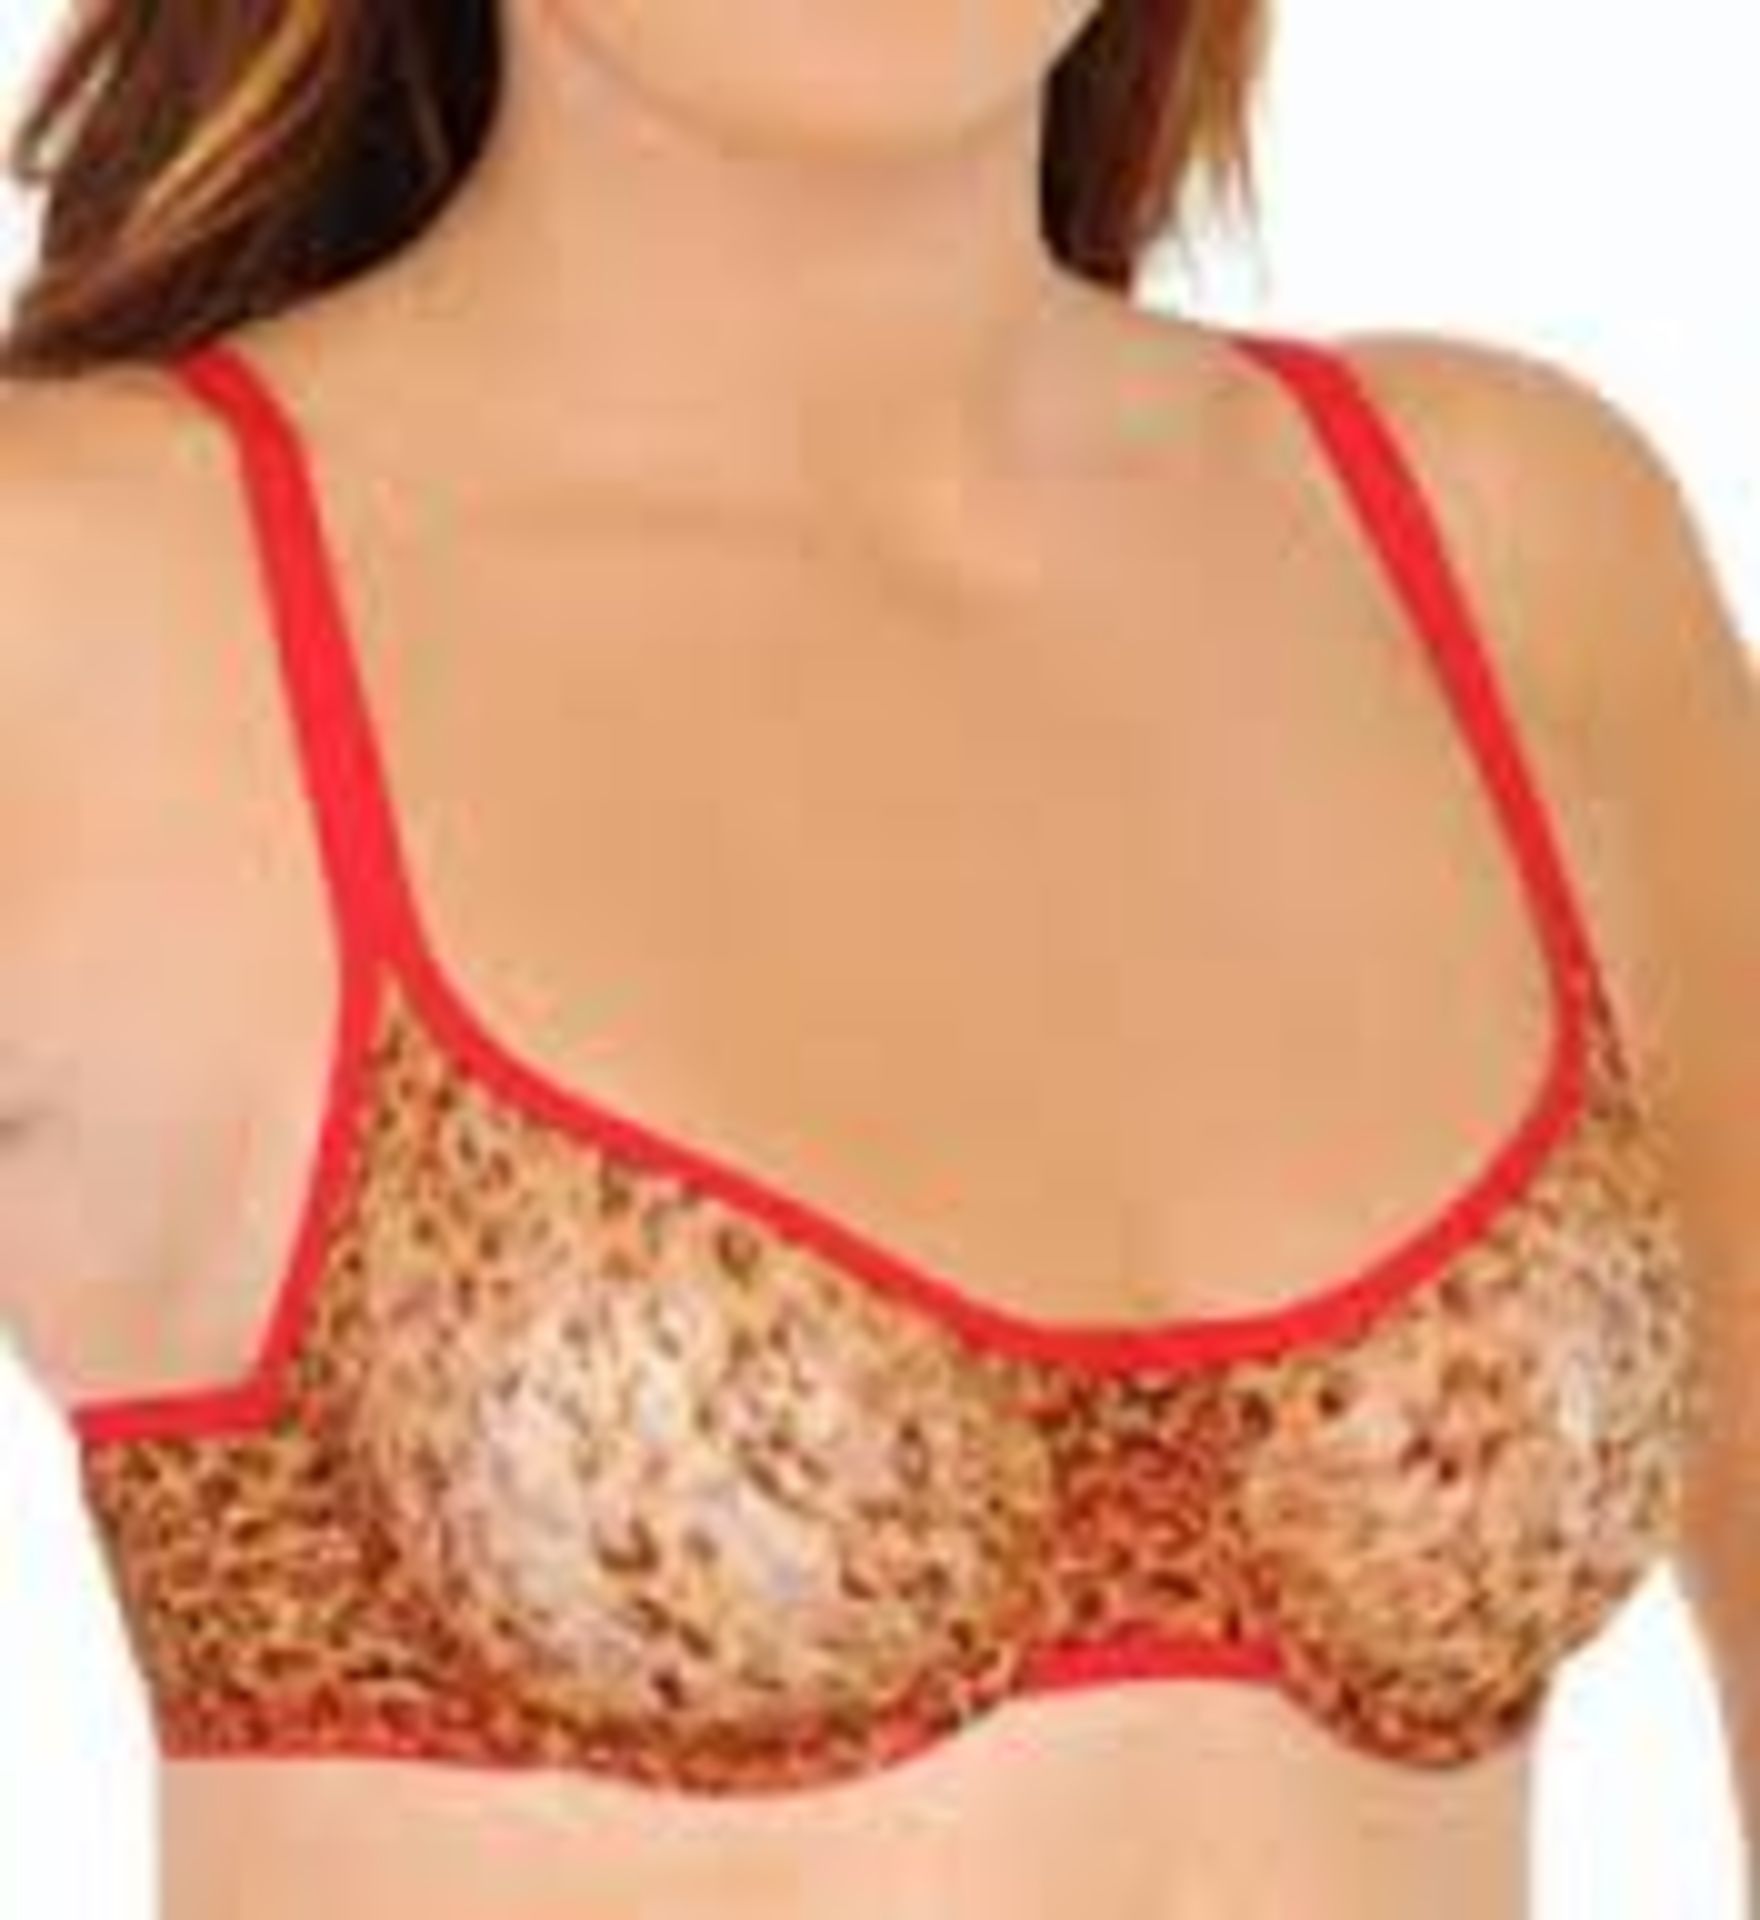 + VAT Brand New A Lot of Four DKNY 451000 Signature Lace Underwire Demi Bras Size 36B ISP $38